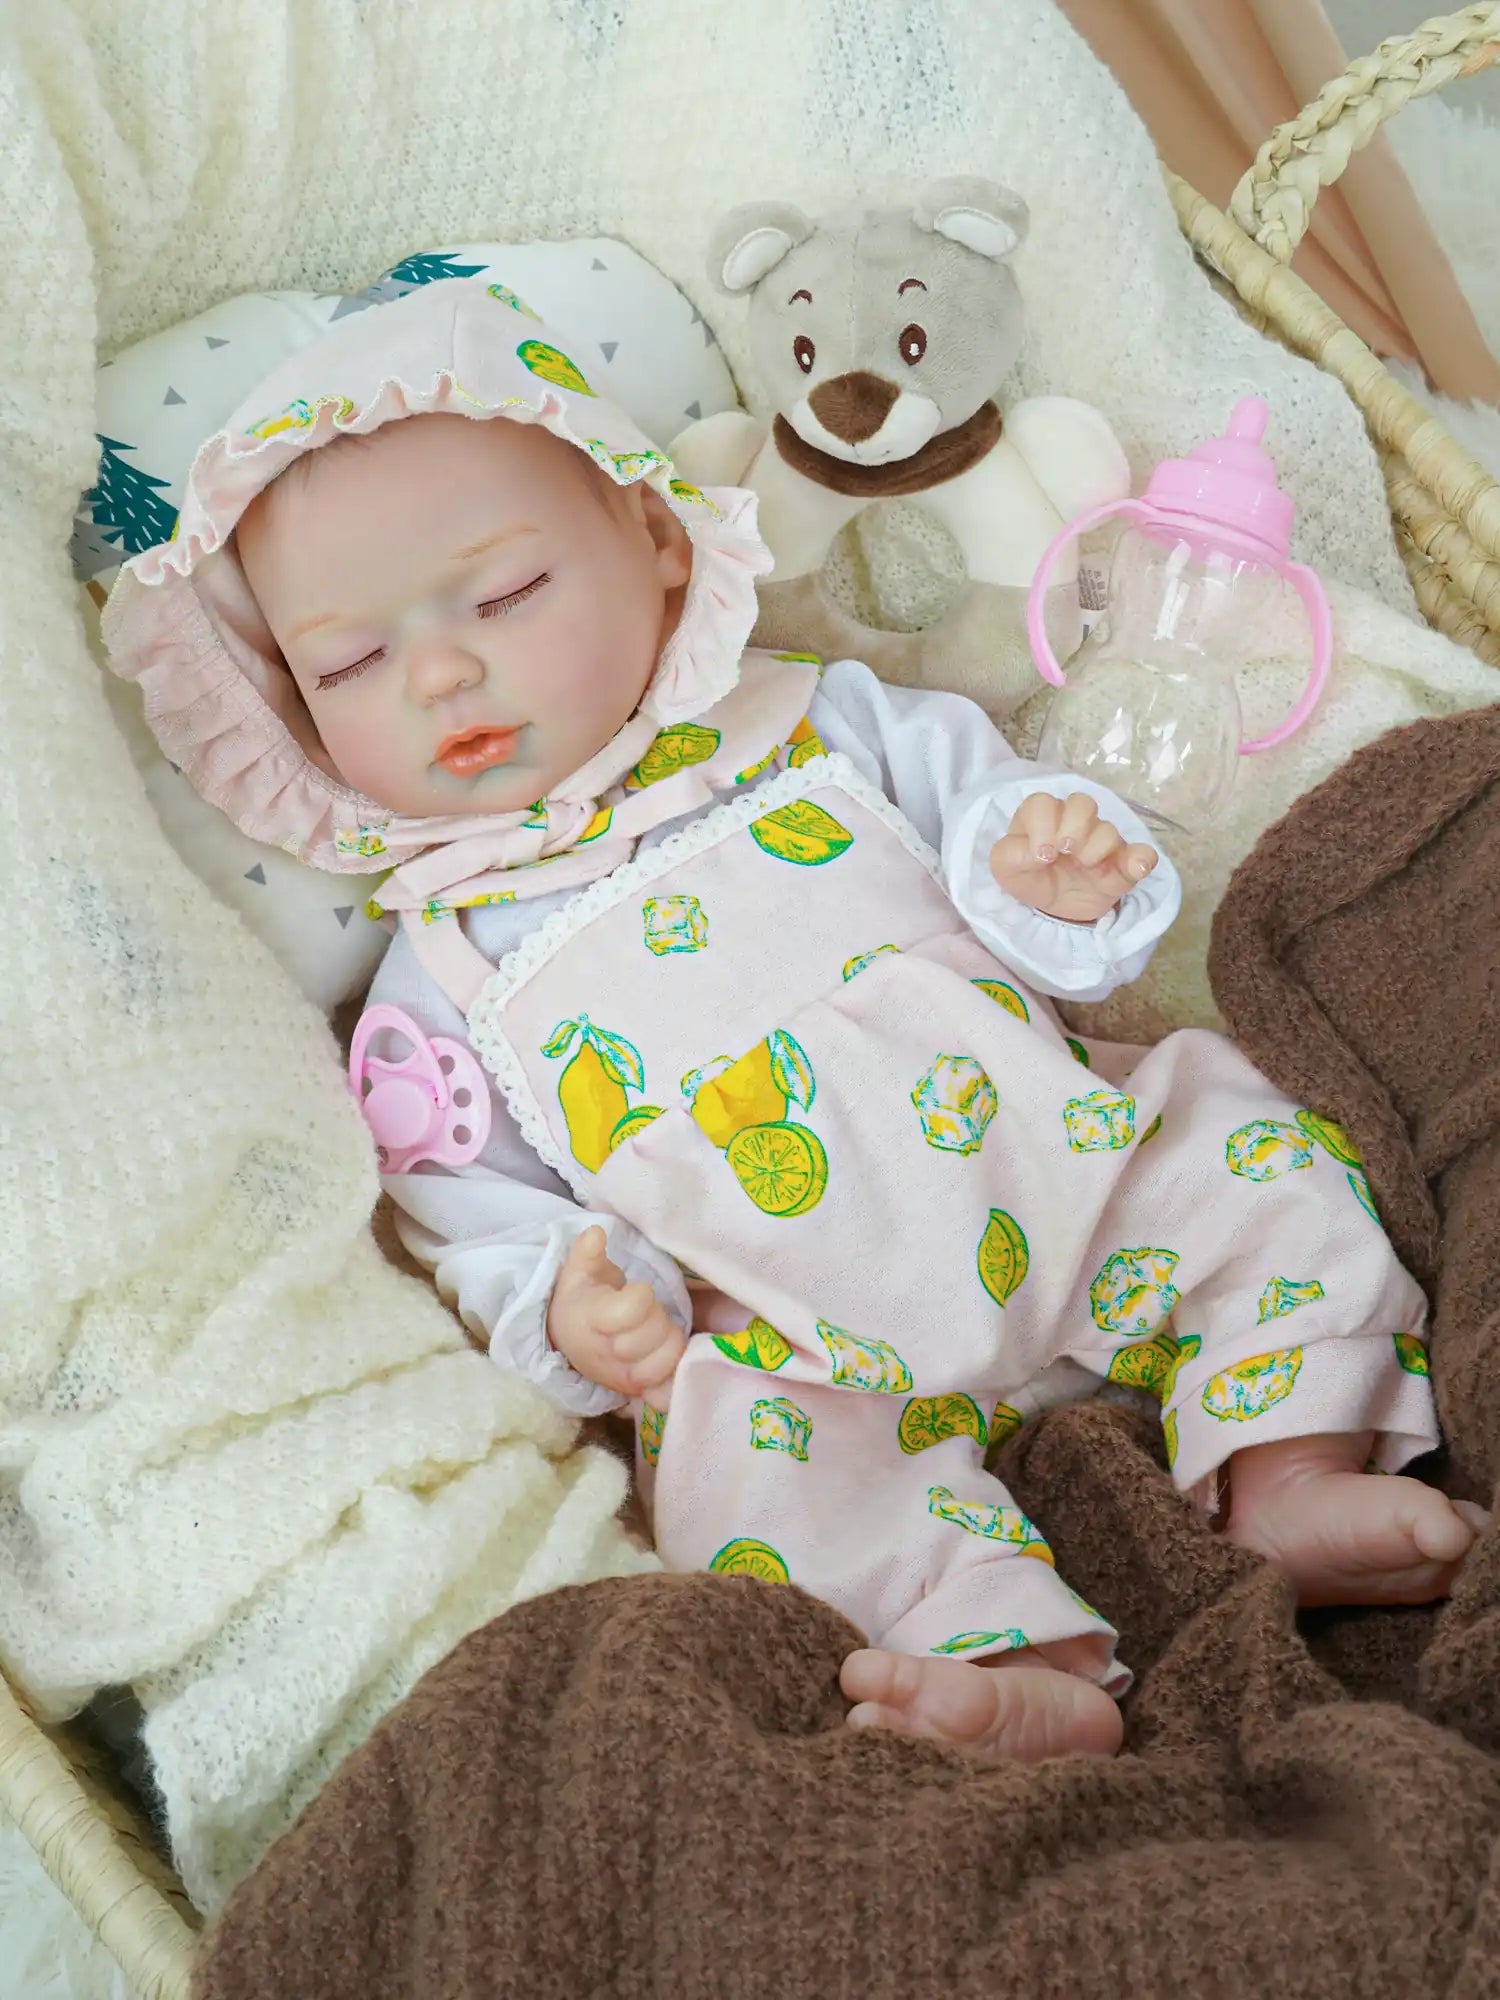 A reborn baby doll dressed in a pink bonnet with lemon prints and a matching outfit sleeps peacefully in a basket, surrounded by soft white blankets, with a plush teddy bear and a pink baby bottle nearby.